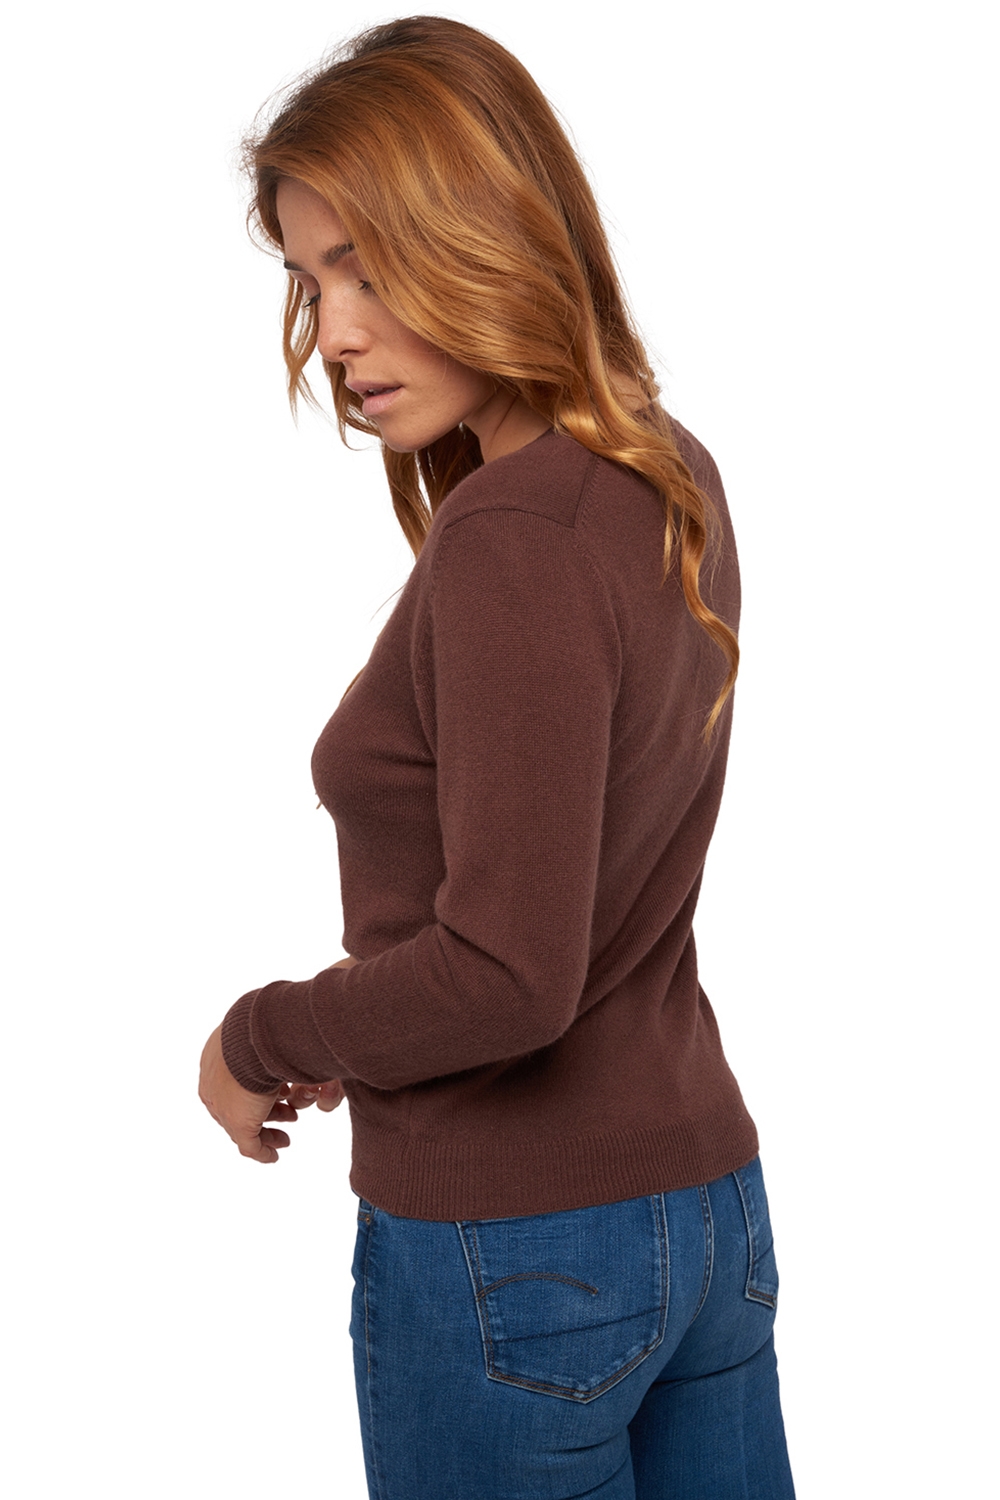 Cashmere ladies basic sweaters at low prices taline chocobrown m